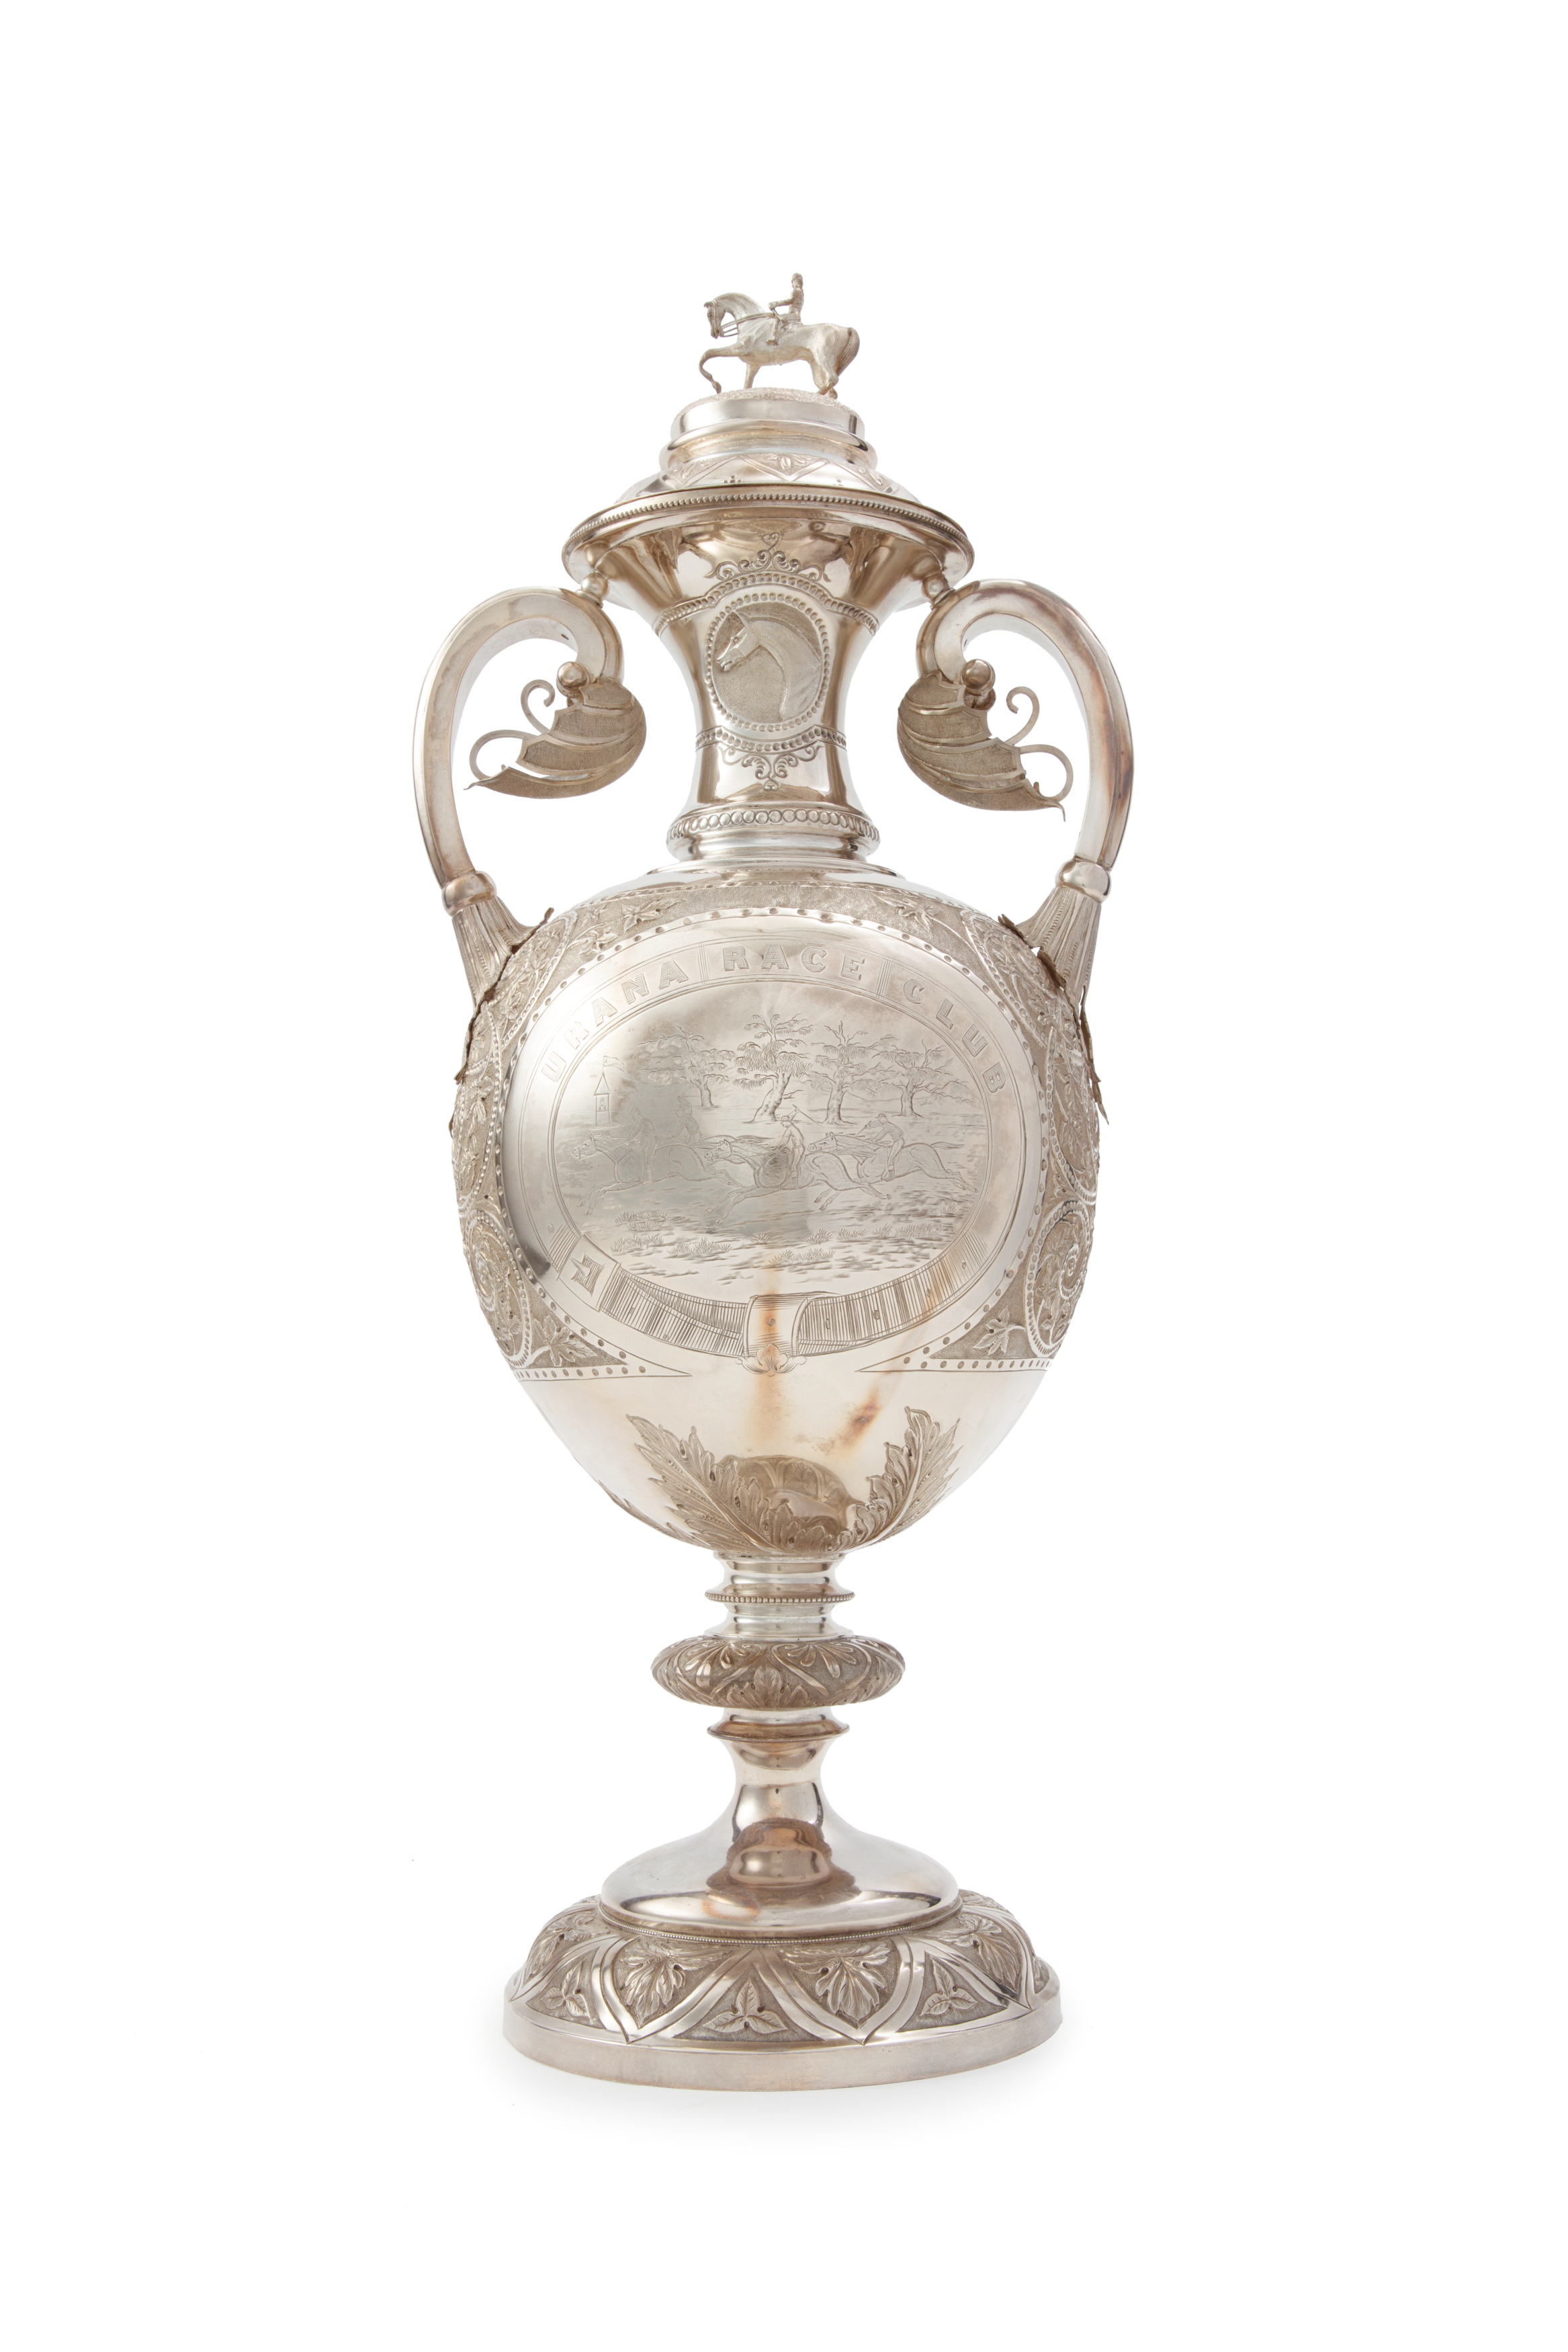 Presentation cup with horse racing motifs